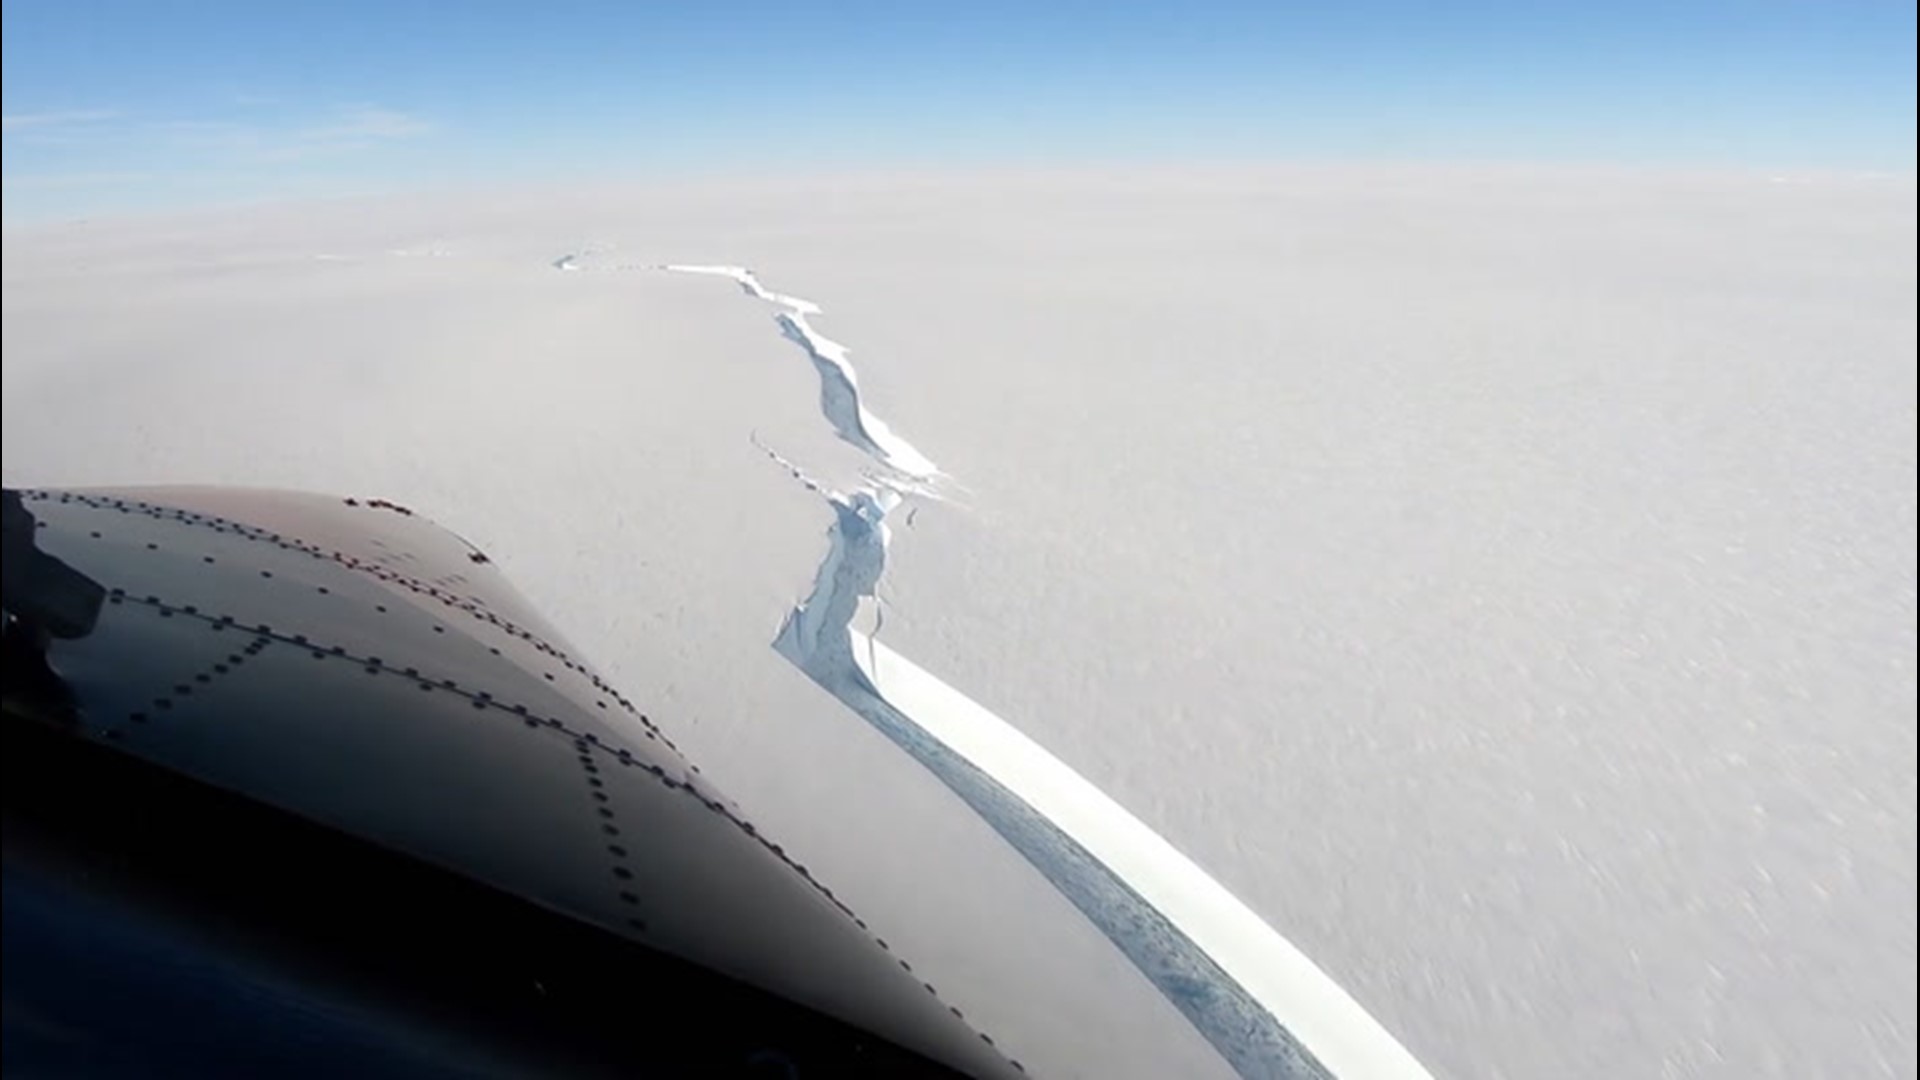 The British Antarctic Survey captured this aerial video of large cracks at Antarctica's Brunt Ice Shelf on Feb. 16. On Feb. 26, it broke off the continent and became a 490-square-mile iceberg.